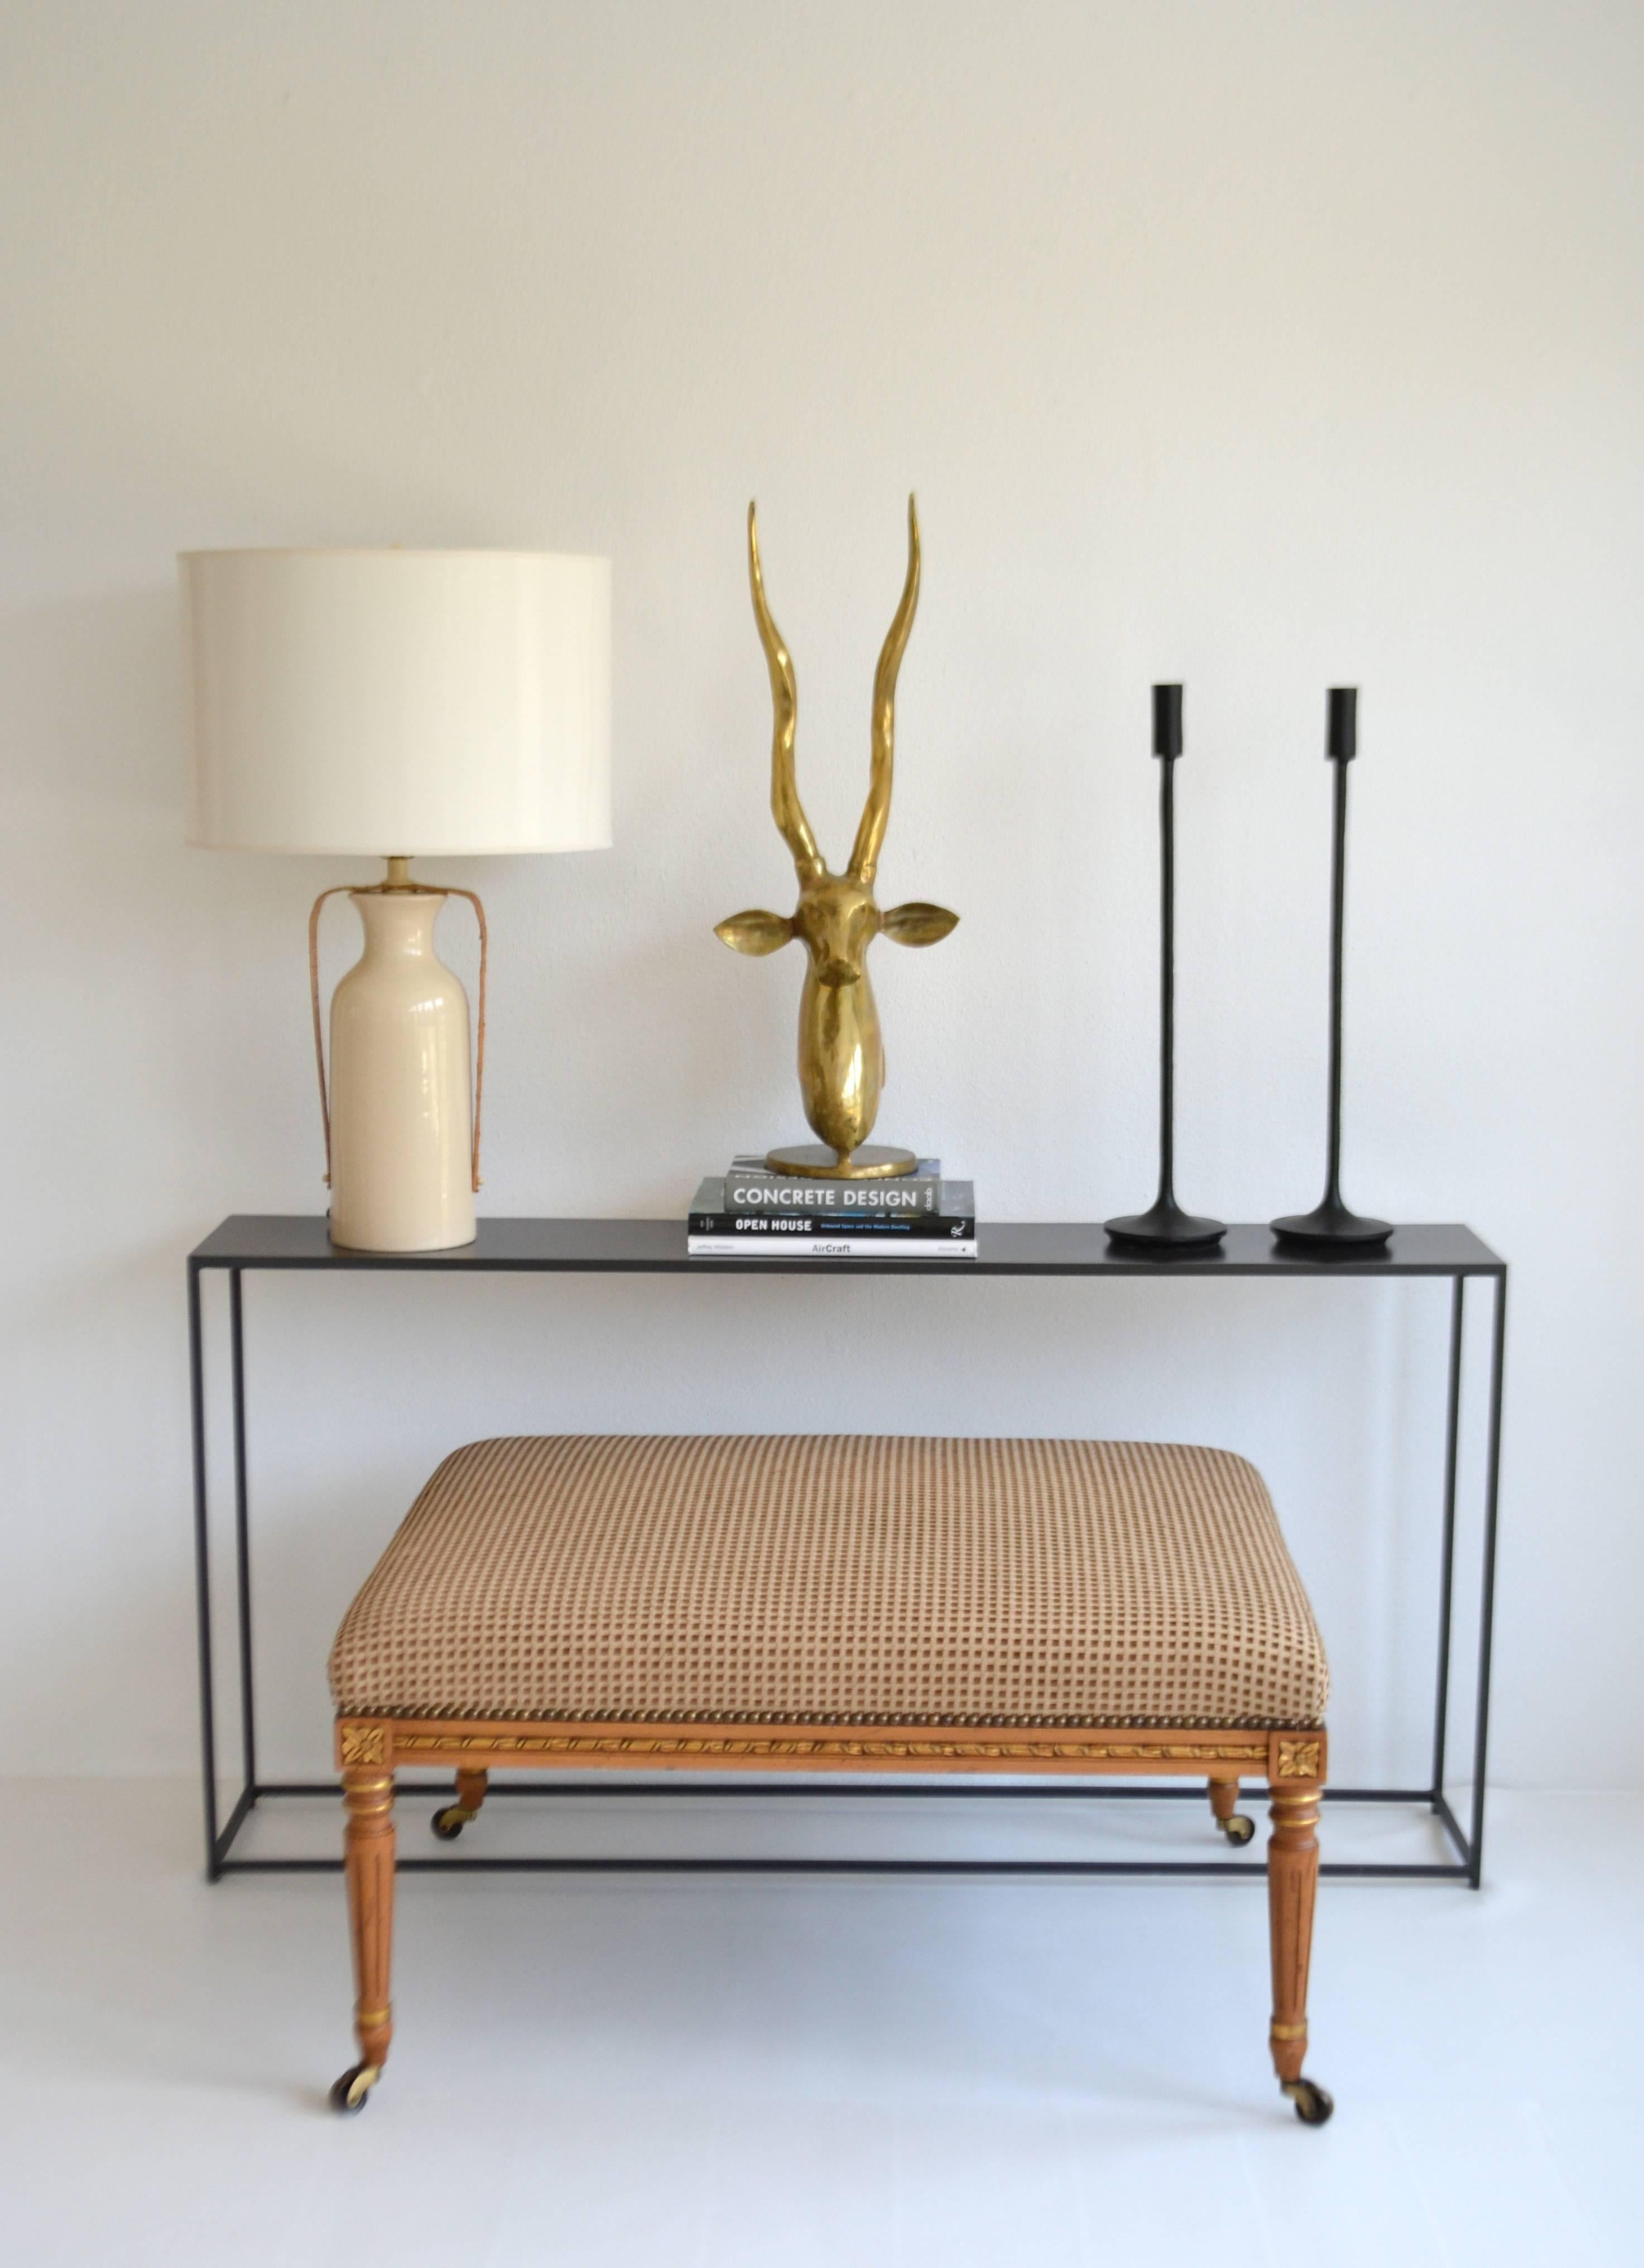 Striking Mid-Century cream glazed jar form table lamp, circa 1960s-1970s. This sculptural lamp is accented with rattan and wired with brass fittings.
Shade not included.
Measurements:
Overall: 29